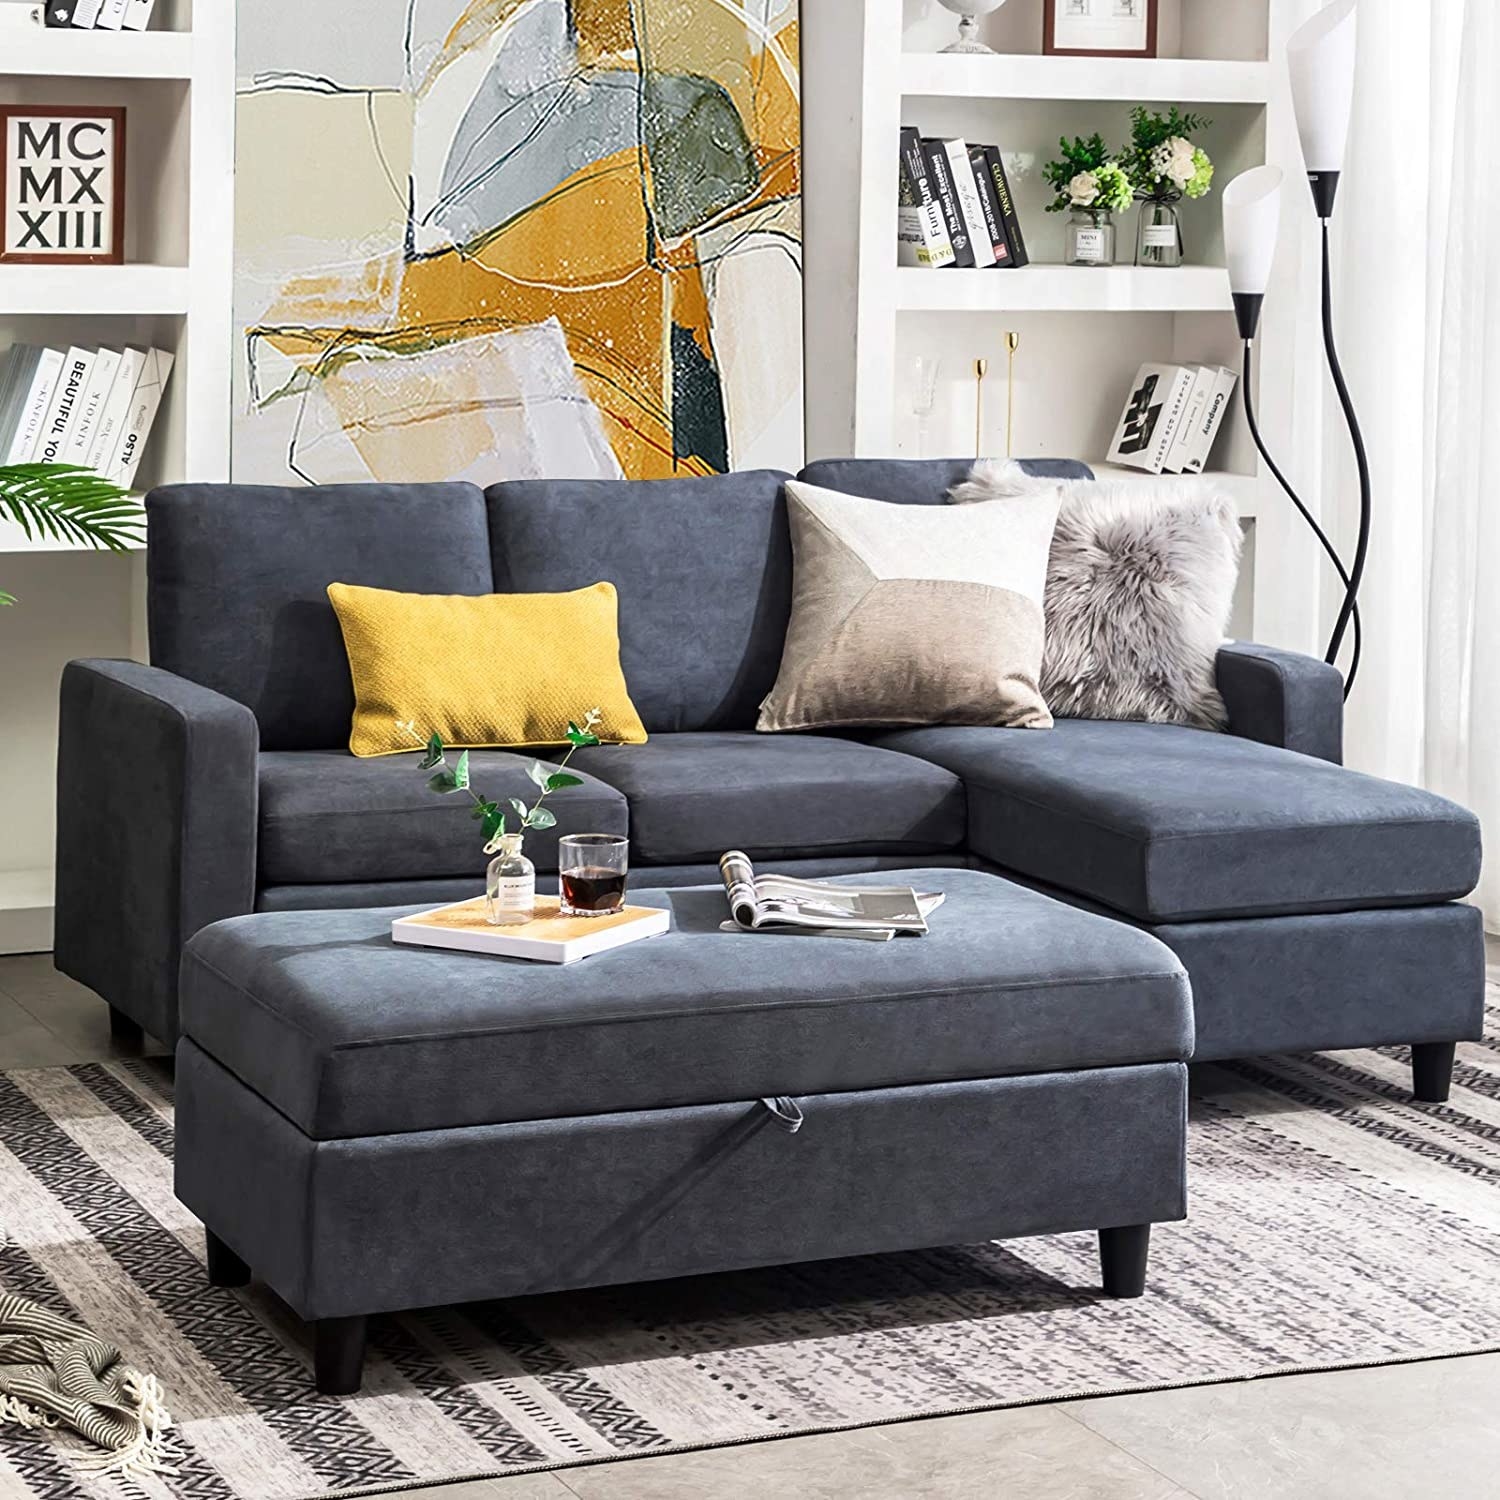 bluish gray three-seat sectional sofa with an extra ottoman